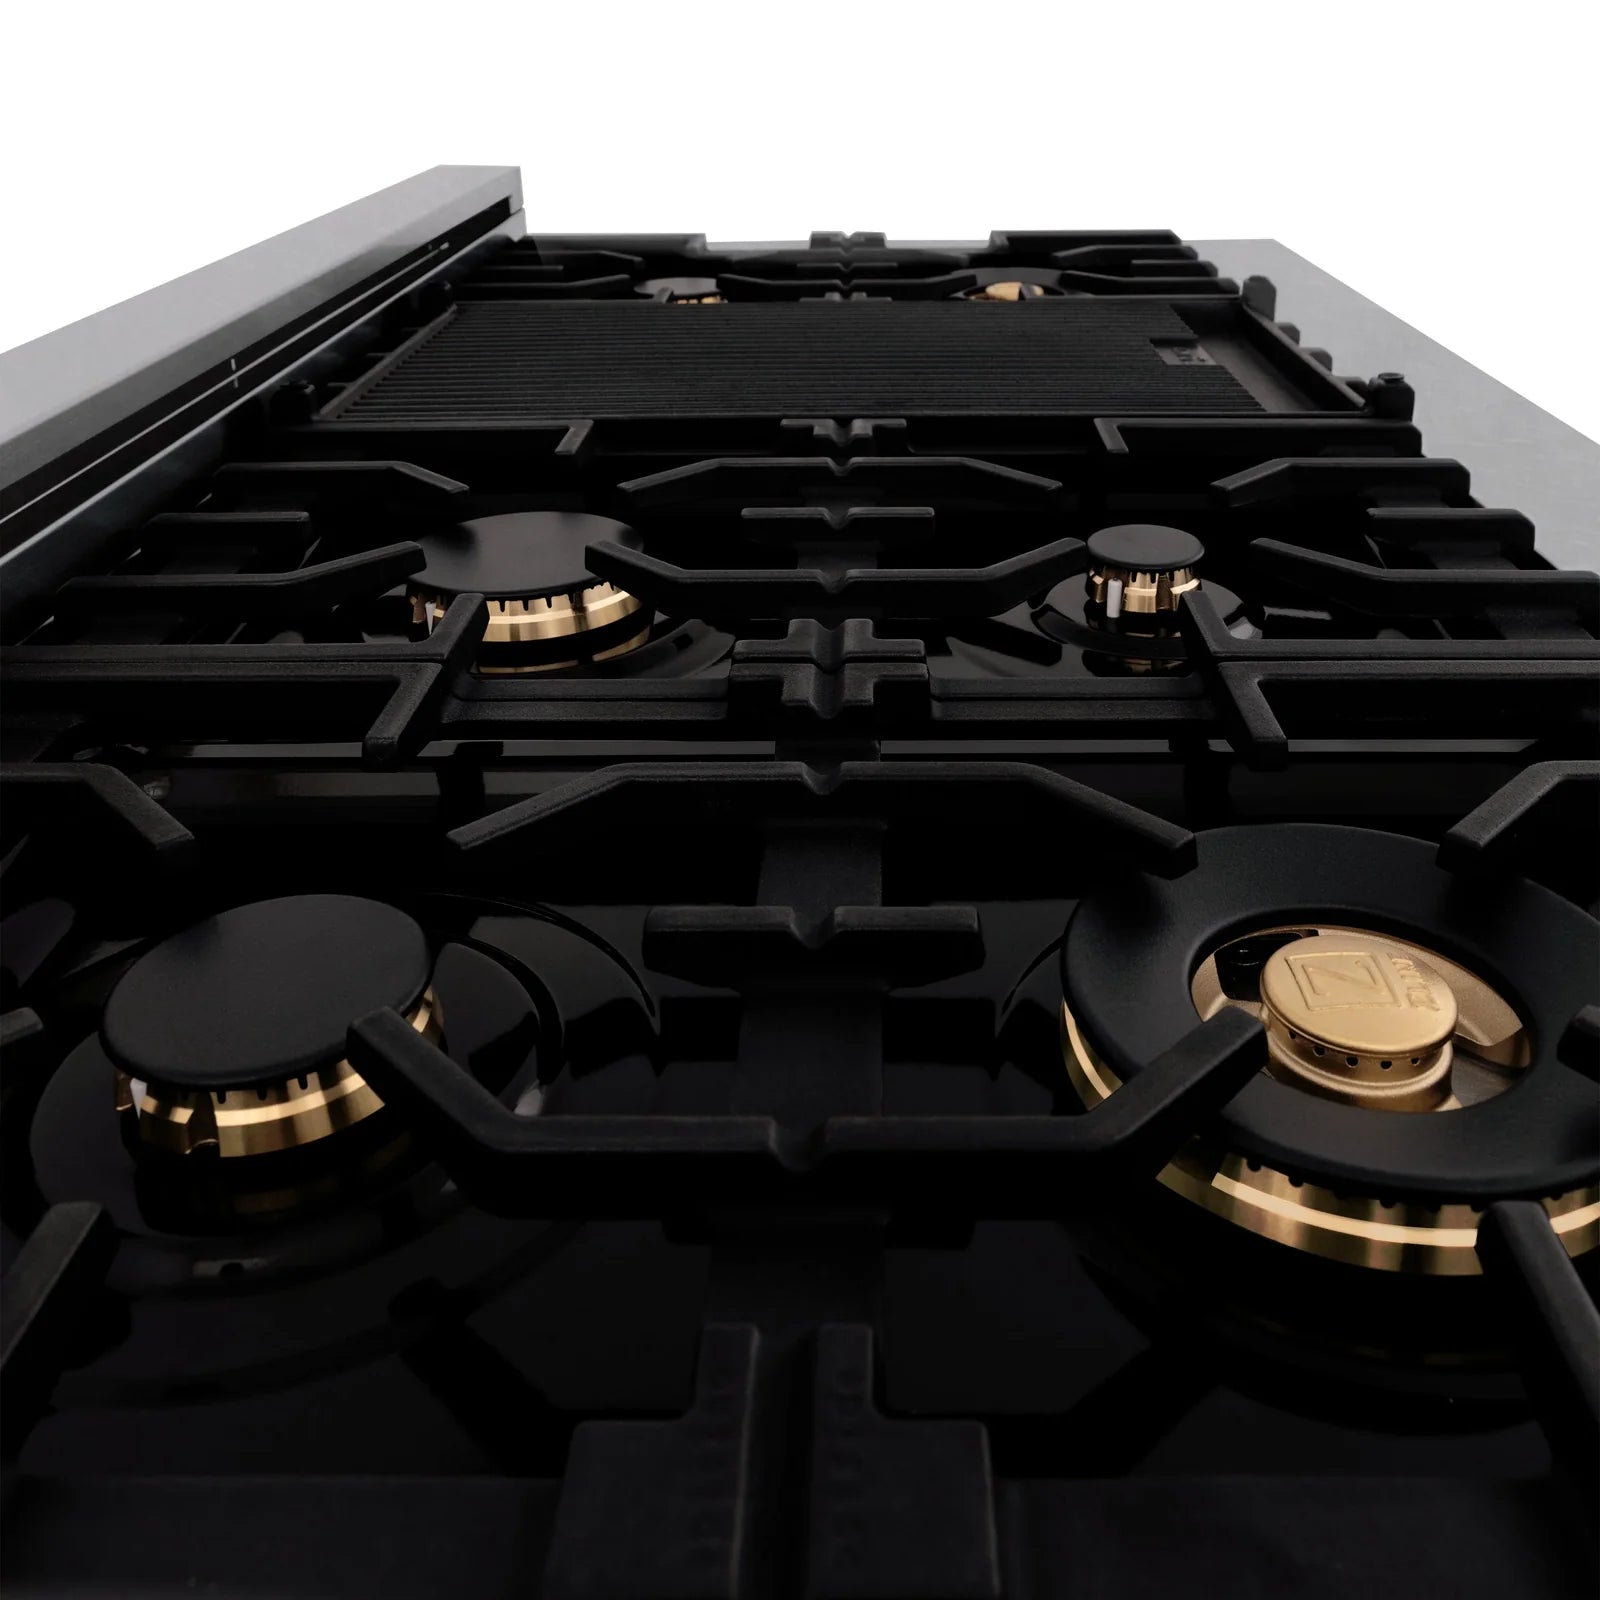 ZLINE 48-Inch Porcelain Gas Stovetop in Fingerprint Resistant Stainless Steel with 7 Gas Brass Burners and Griddle - RTS-BR-GR-48